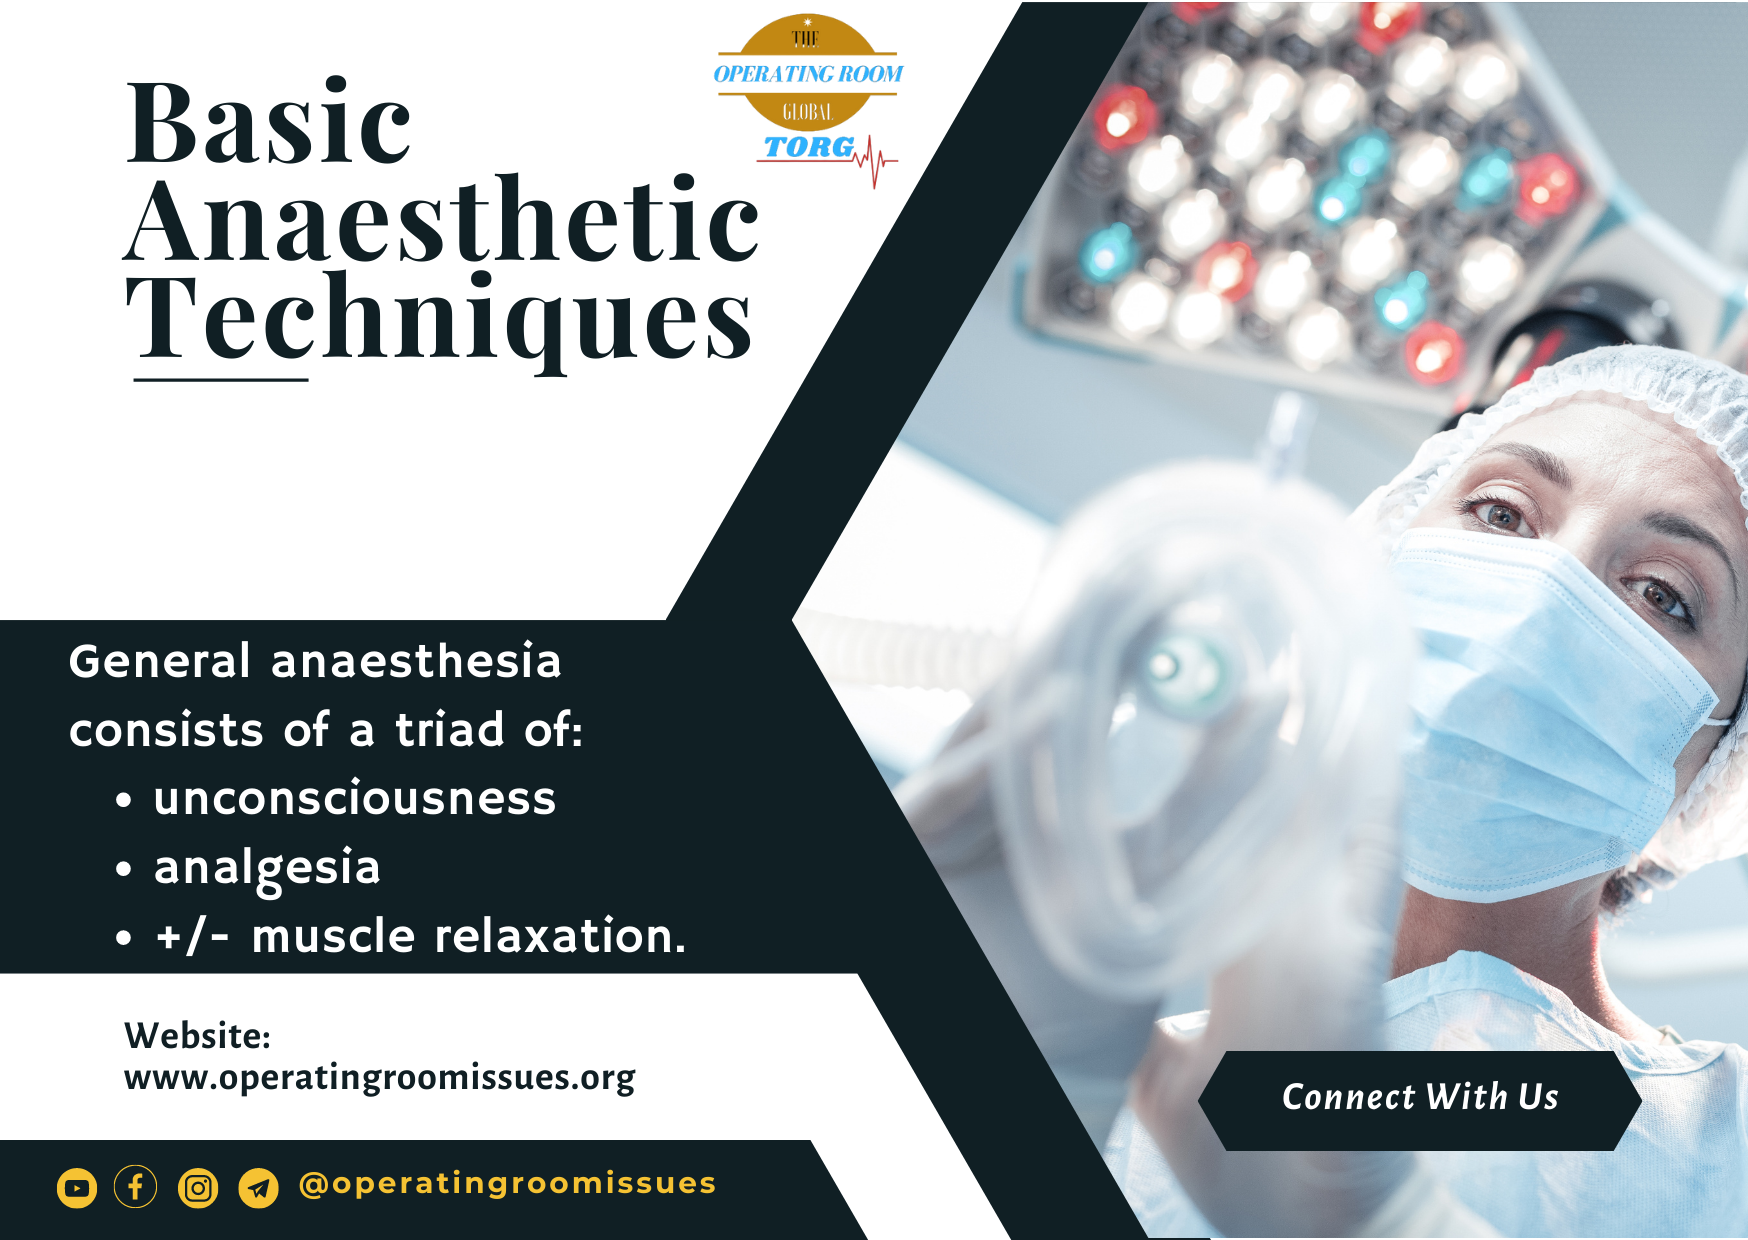 Advanced Anesthesia Techniques: Ensuring Safe and Comfortable Procedures